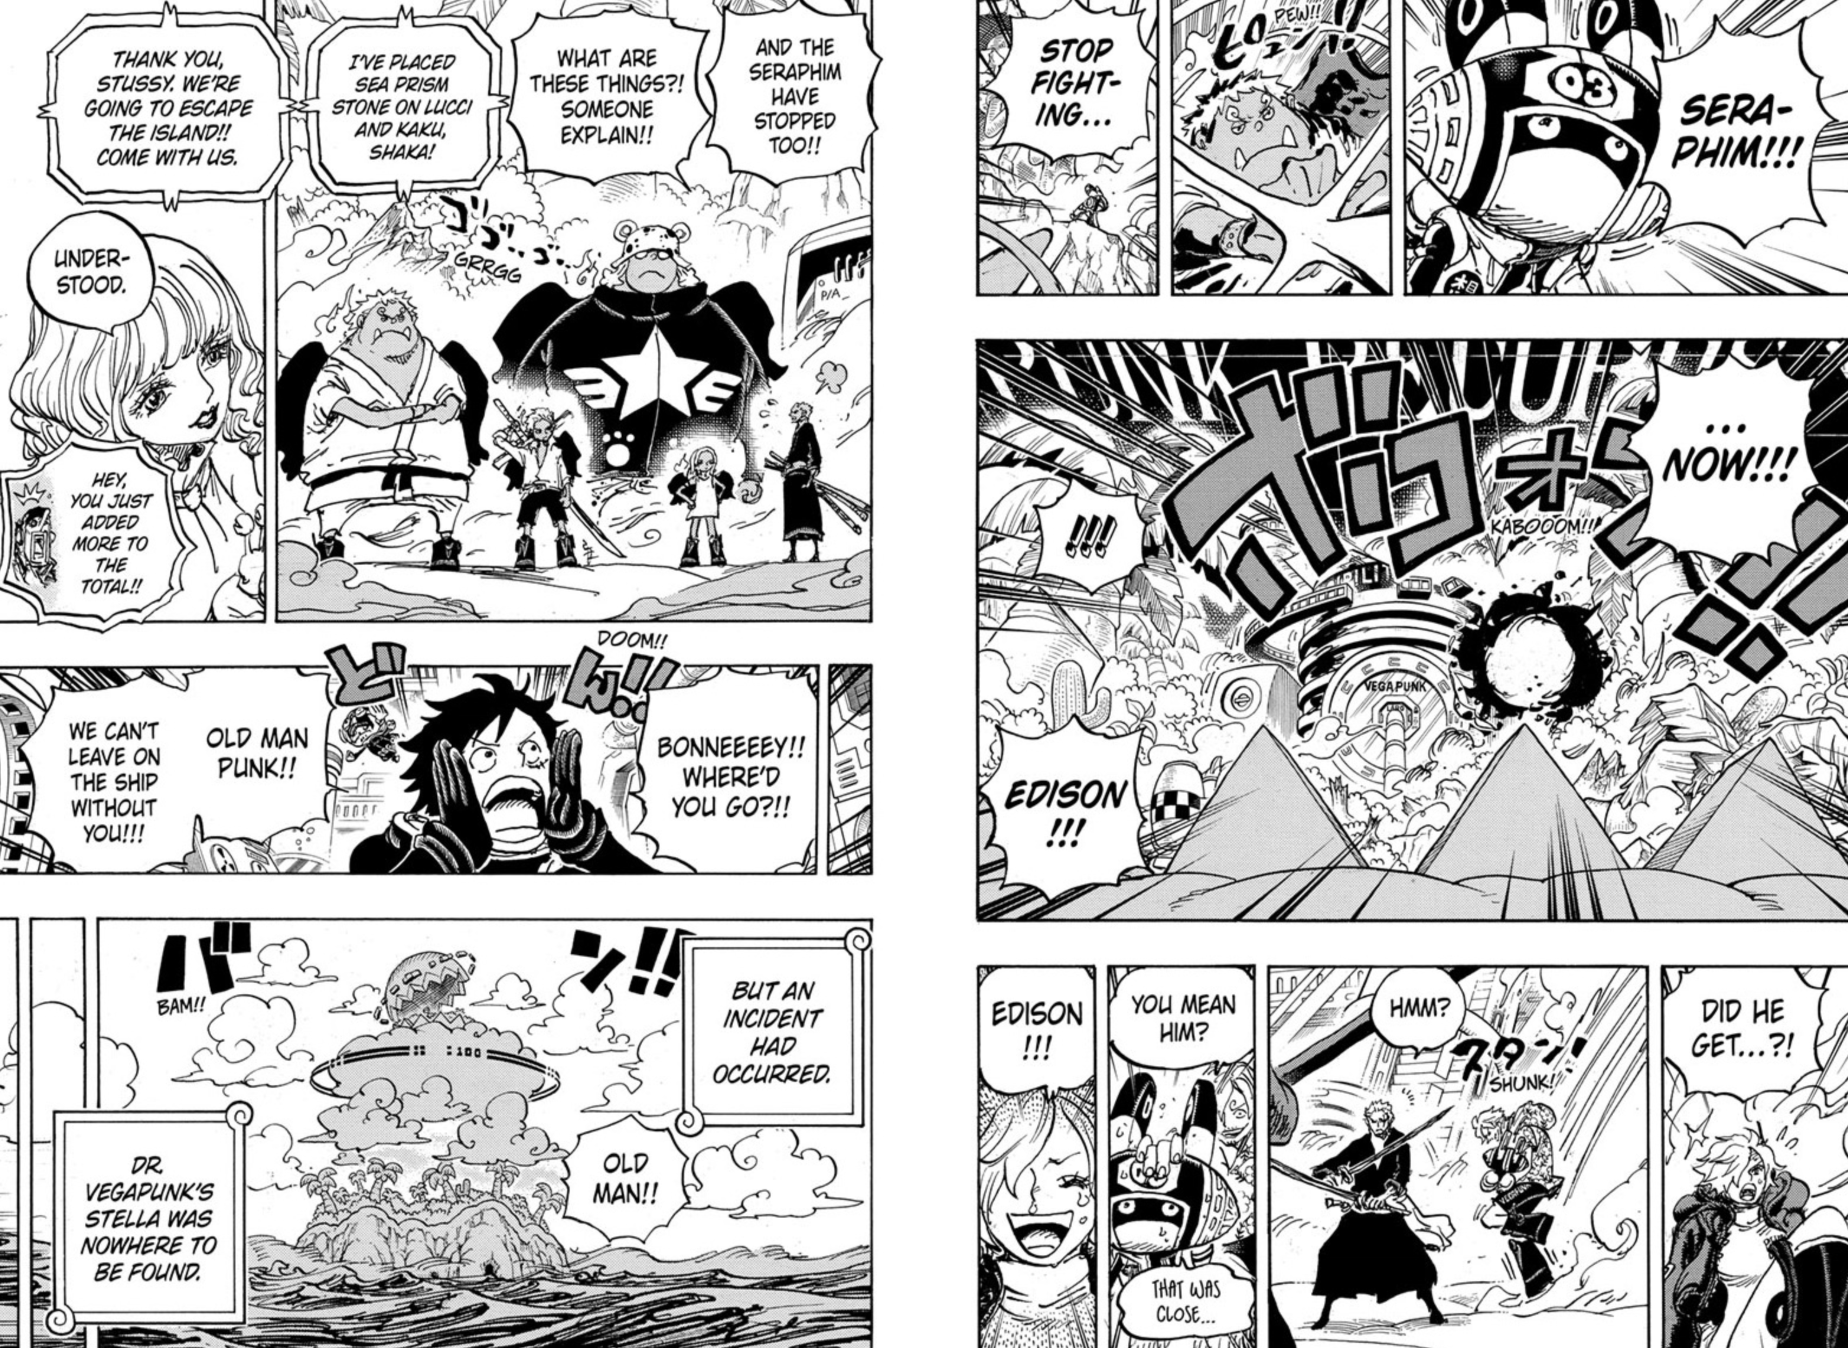 One Piece Chapter 1073 Pages 8-9